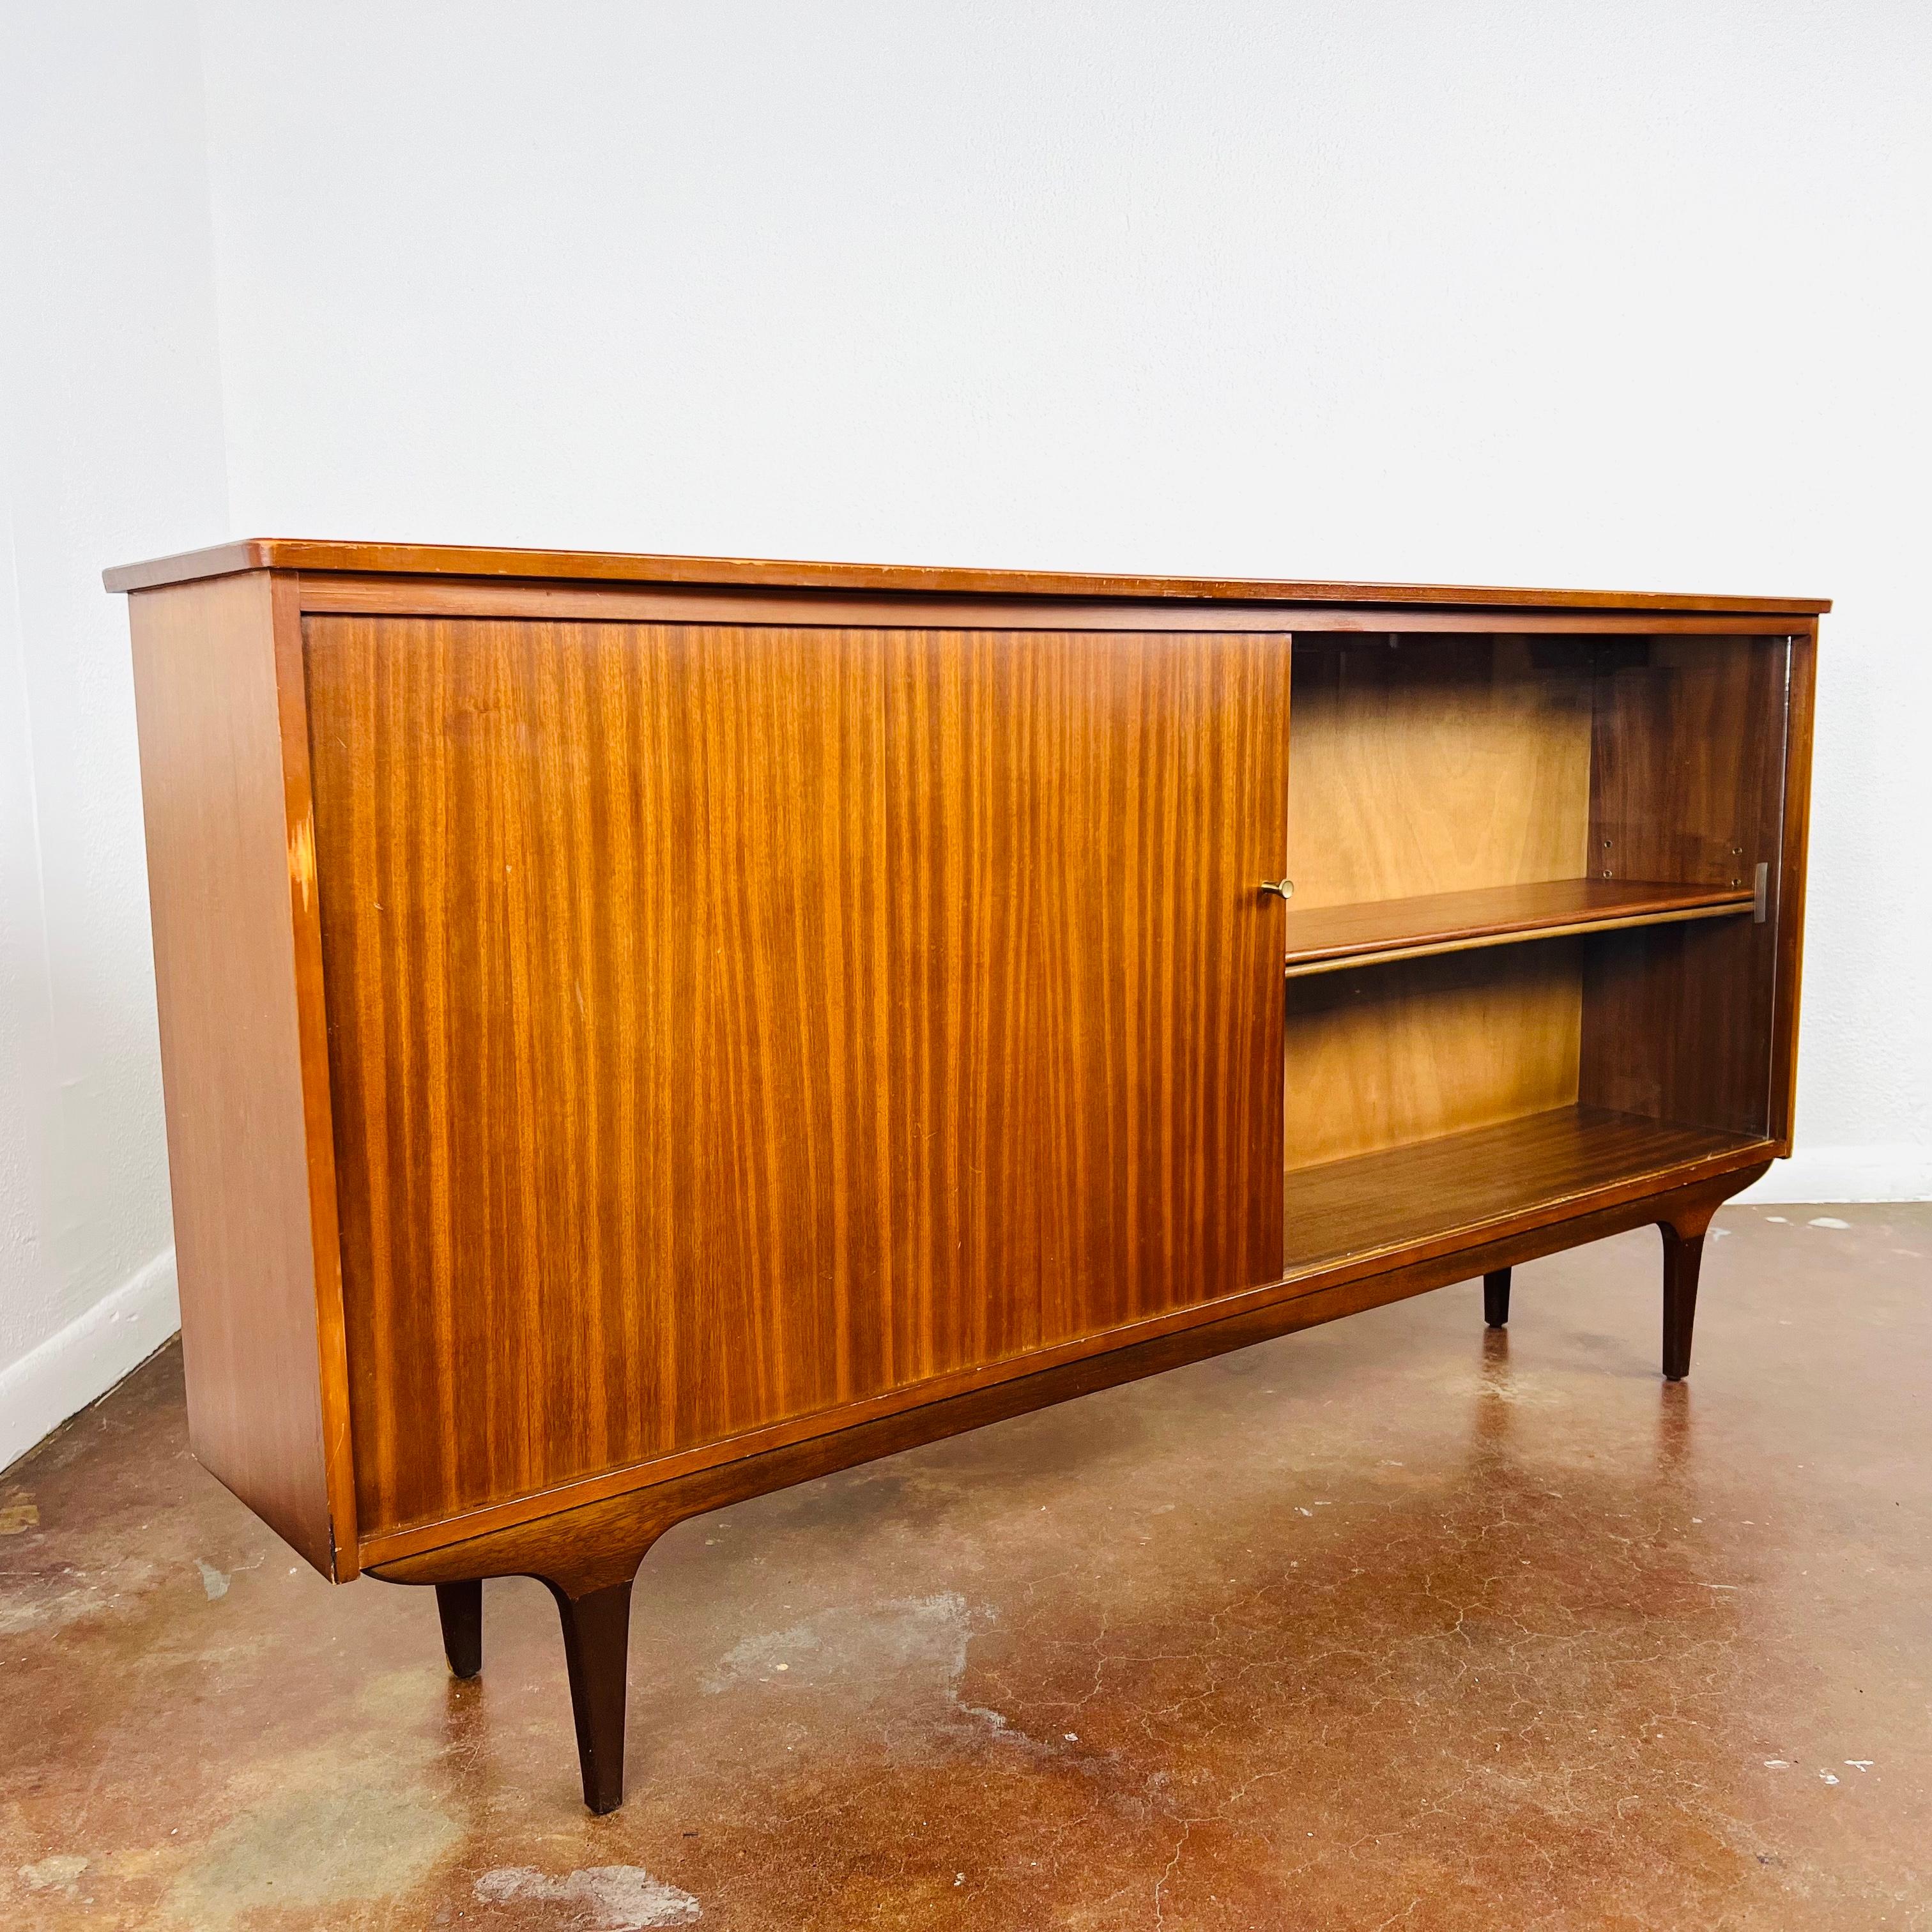 Mid-Century teak glazed sideboard with single-glass sliding door and single-wooden sliding door. Shelved interior, pin legs. Good, sturdy condition with minor surface marks/scratches due to age and use.

Dimensions:
30.25